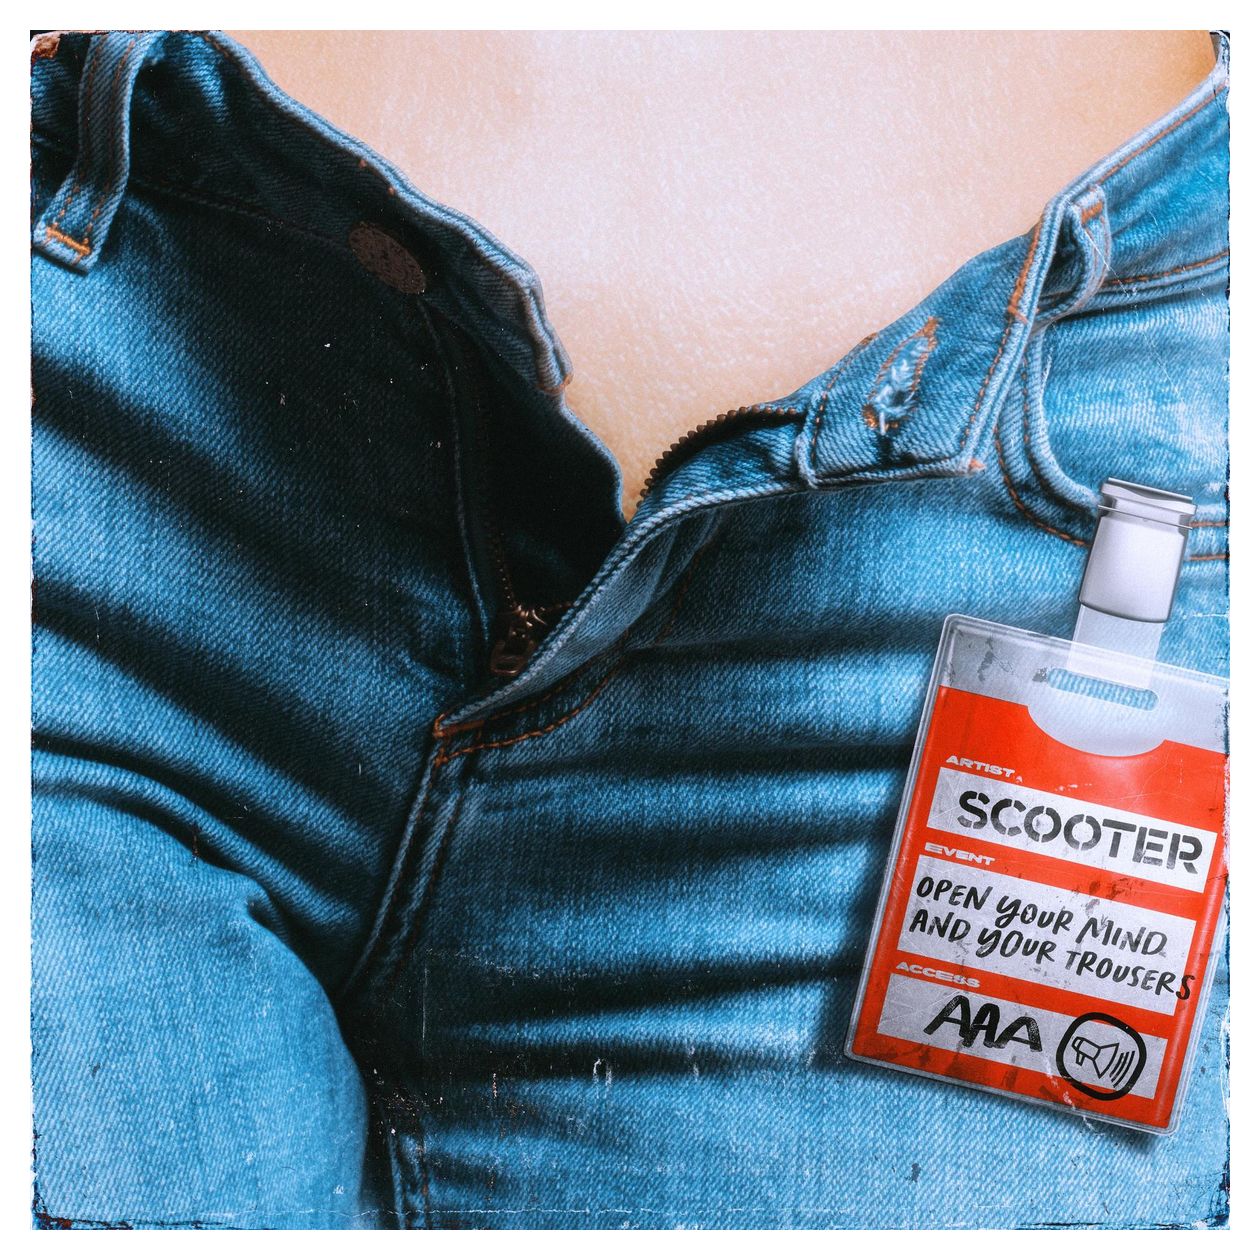 Scooter - Open Your Mind and Your Trousers 